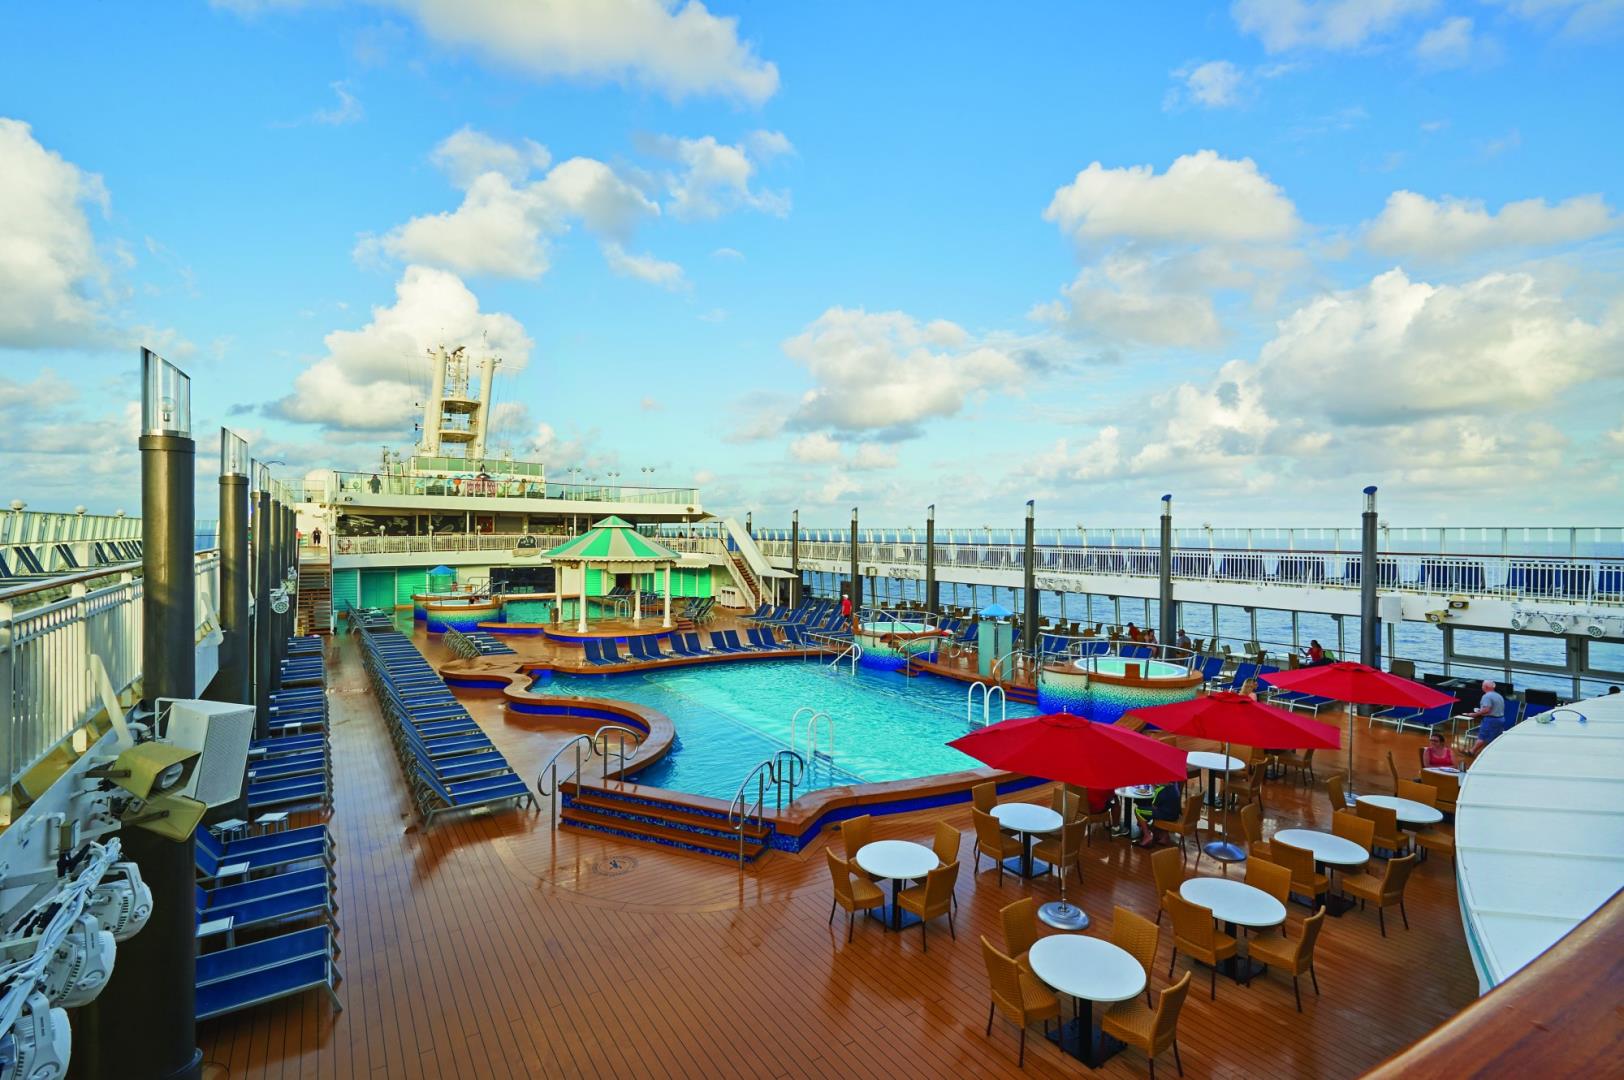 11-day Cruise to Panama Canal: Mexico, Costa Rica & Belize from Miami, Florida on Norwegian Pearl